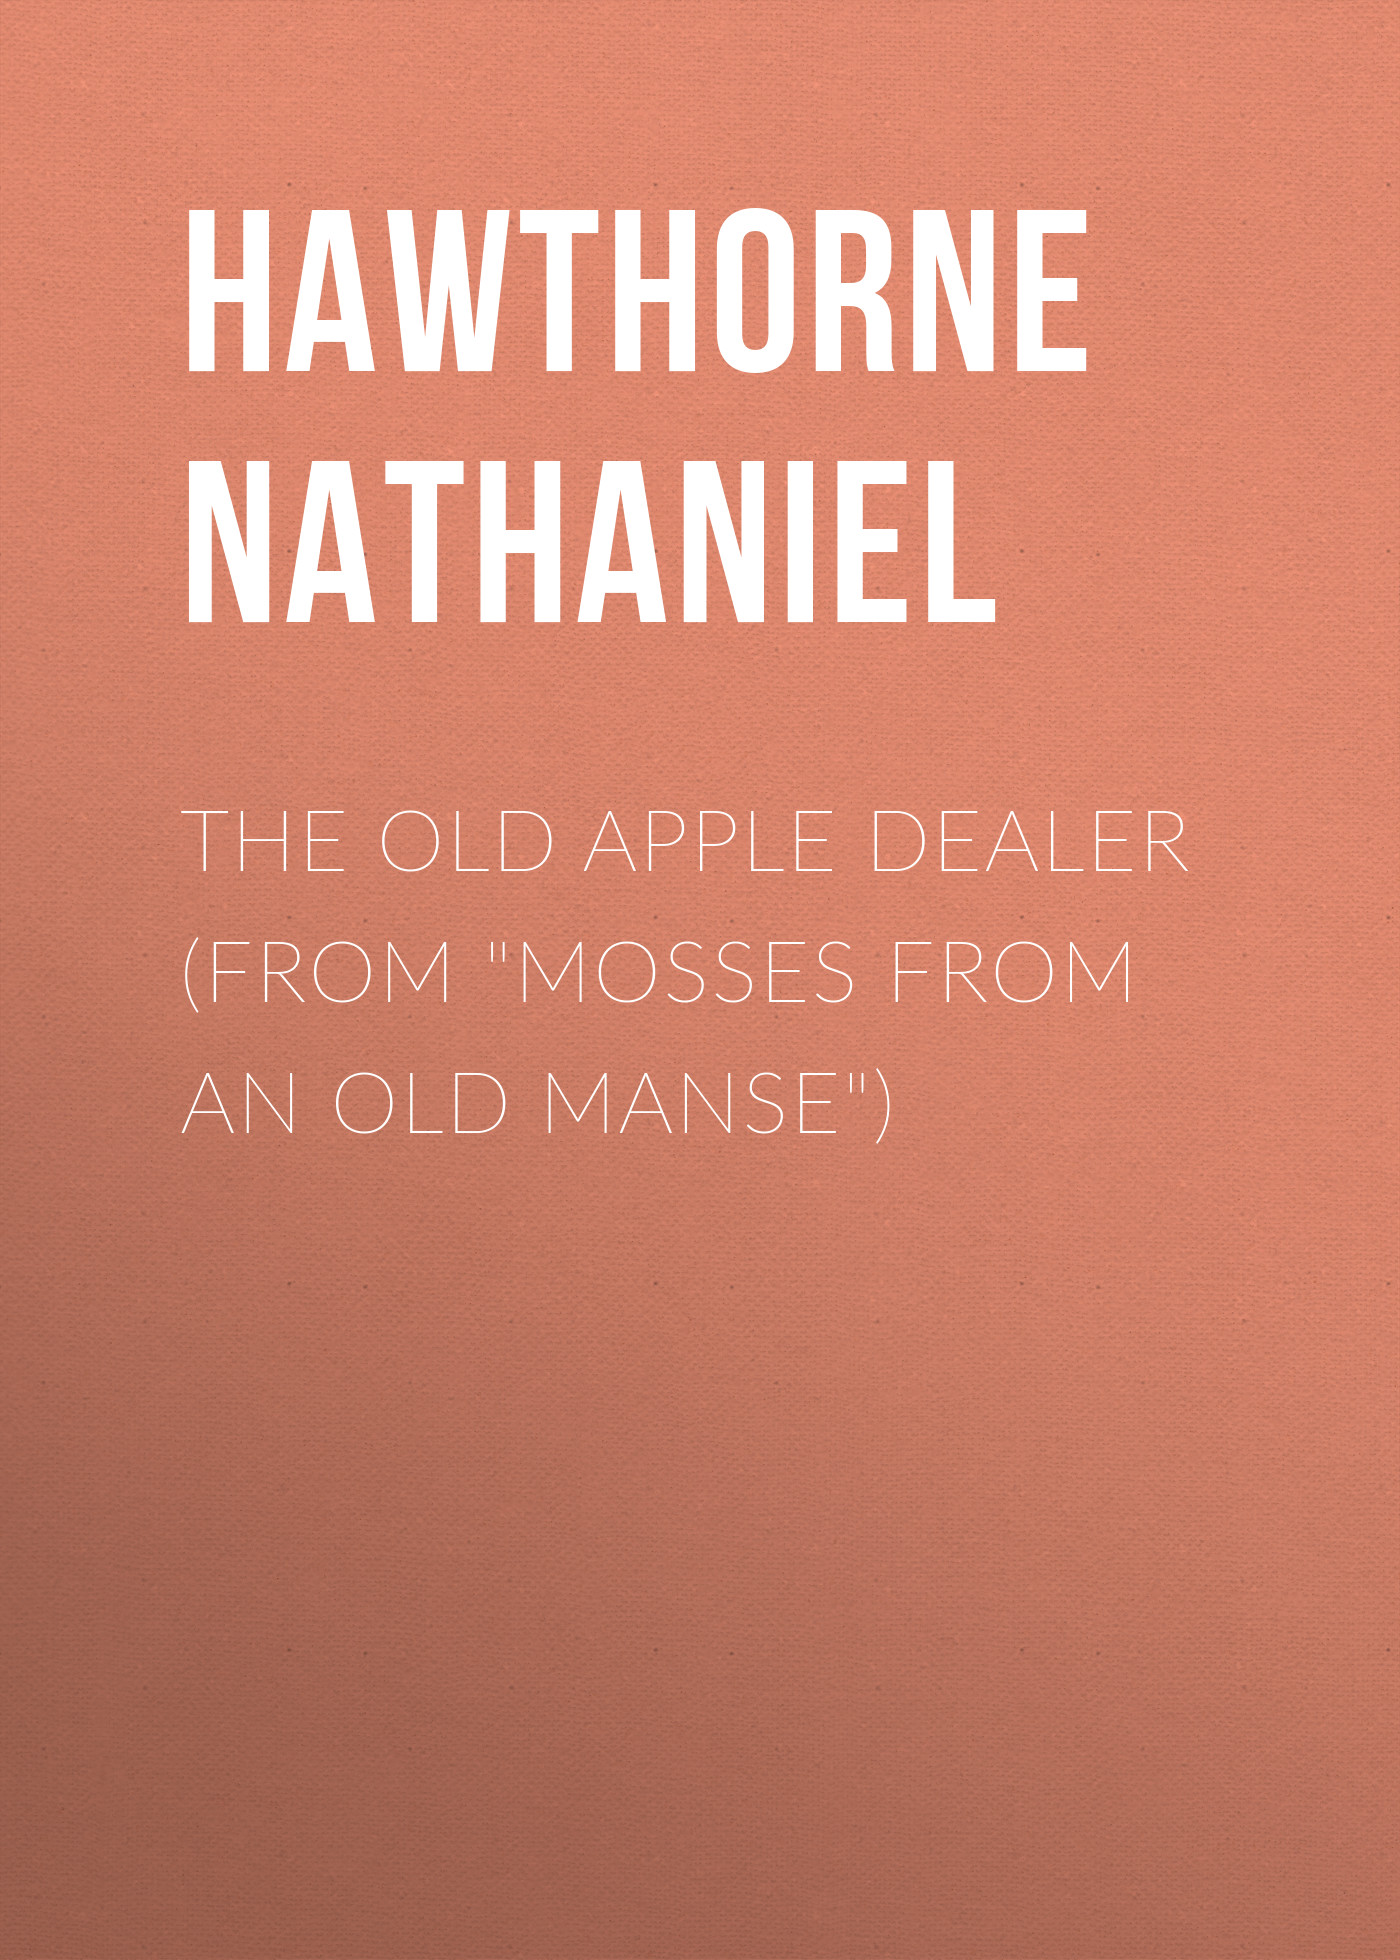 The Old Apple Dealer (From"Mosses from an Old Manse")